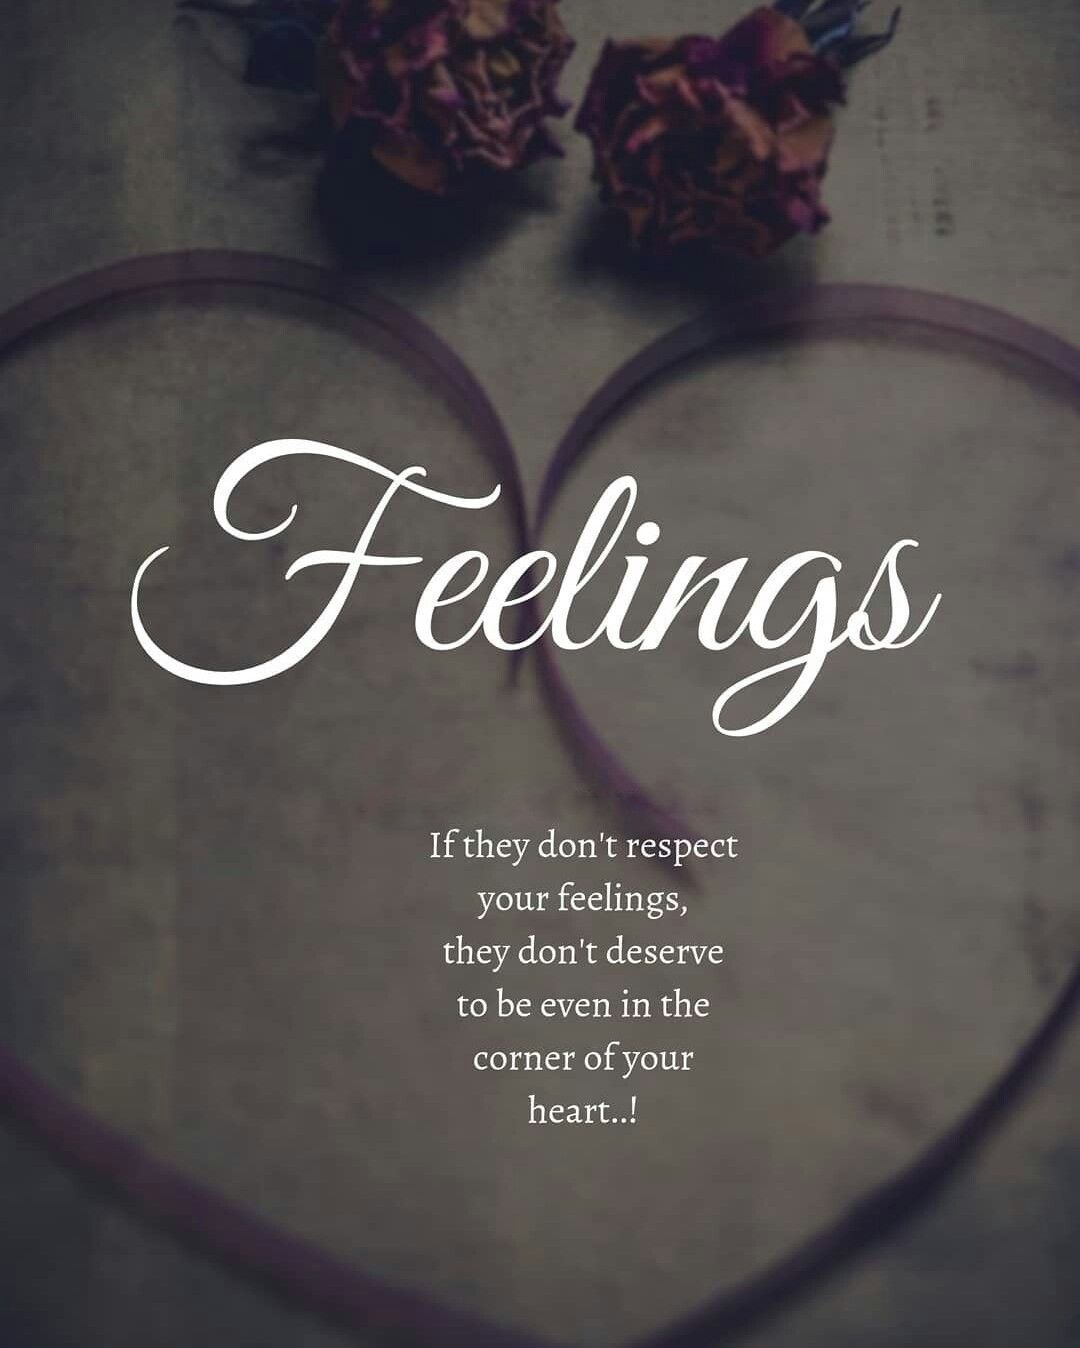 Sad Quotes Collection for WhatsApp DP/Status - Facebook Display ...